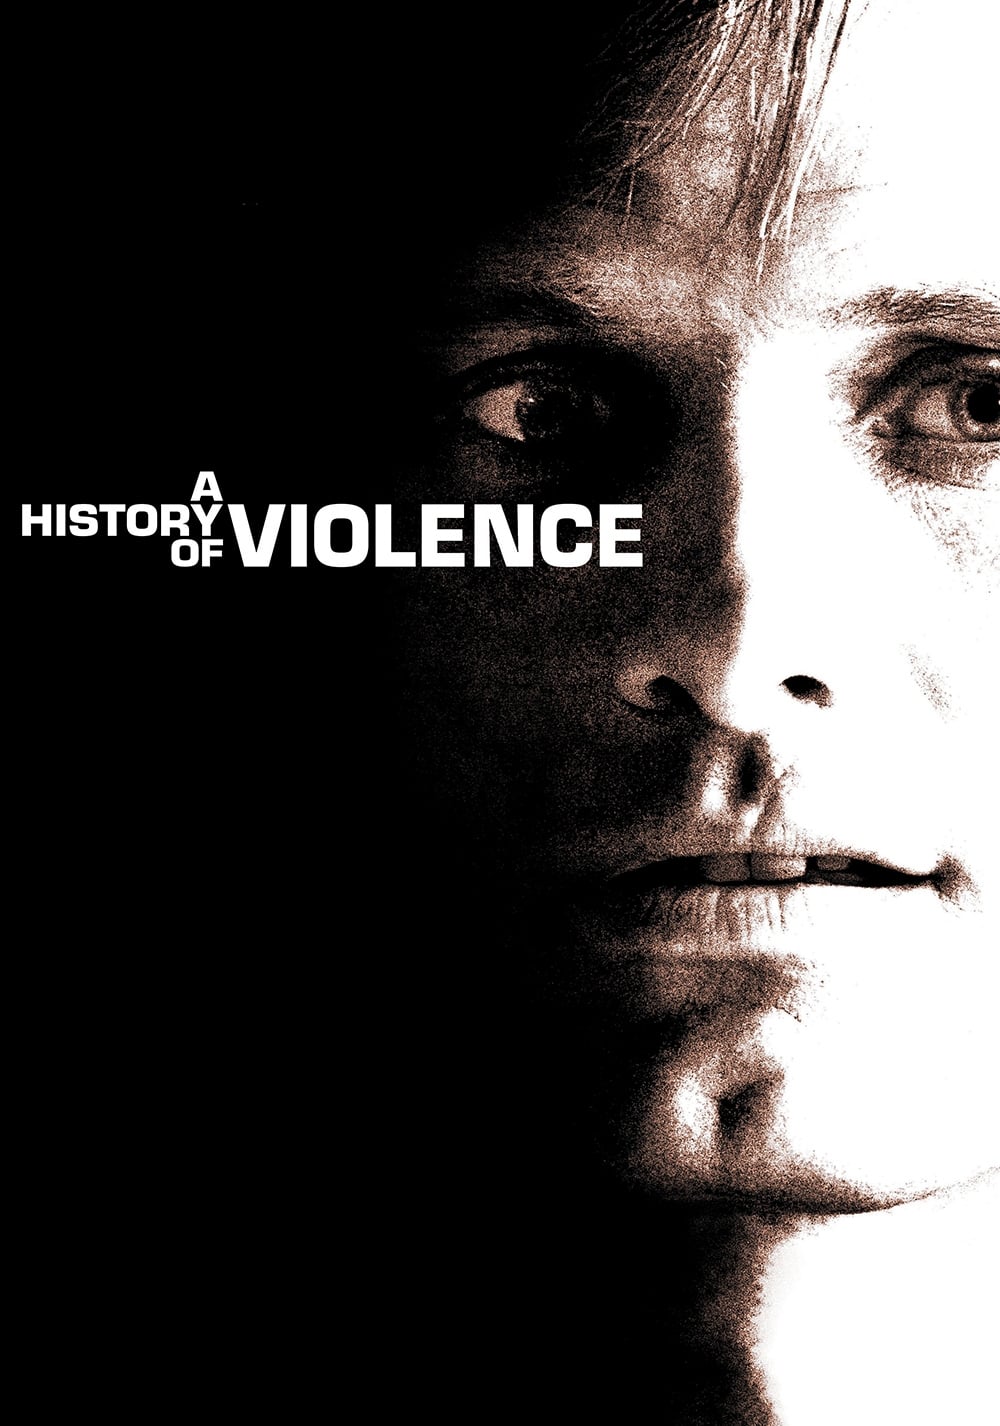 A History of Violence Movie poster